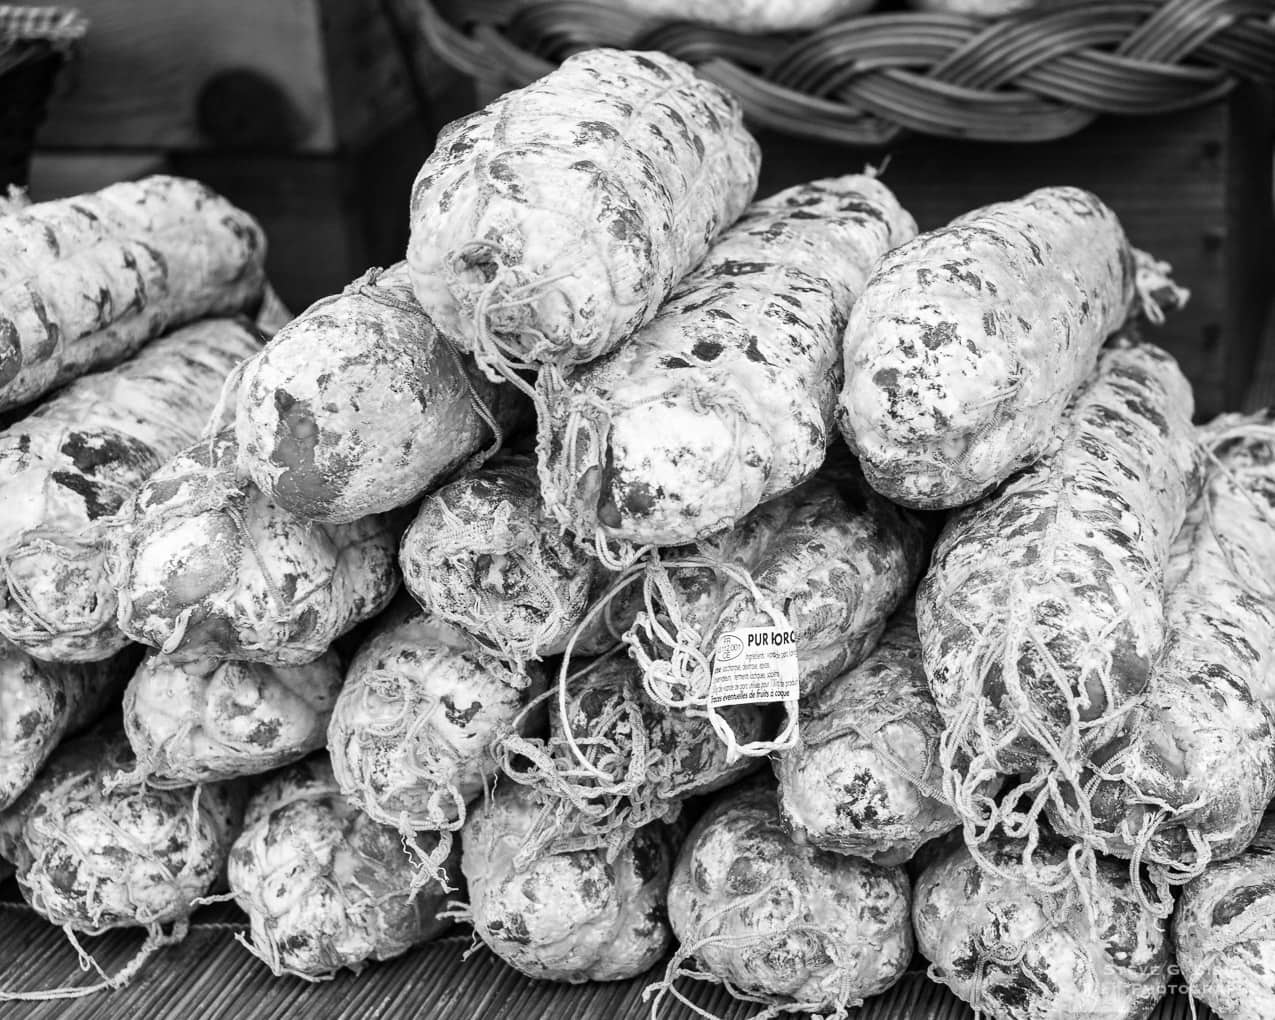 Photo 12/32 of a series of black and white photographs from the 2018 Grande Braderie D'Ixelles sidewalk sale and street festival in Brussels, Belgium.